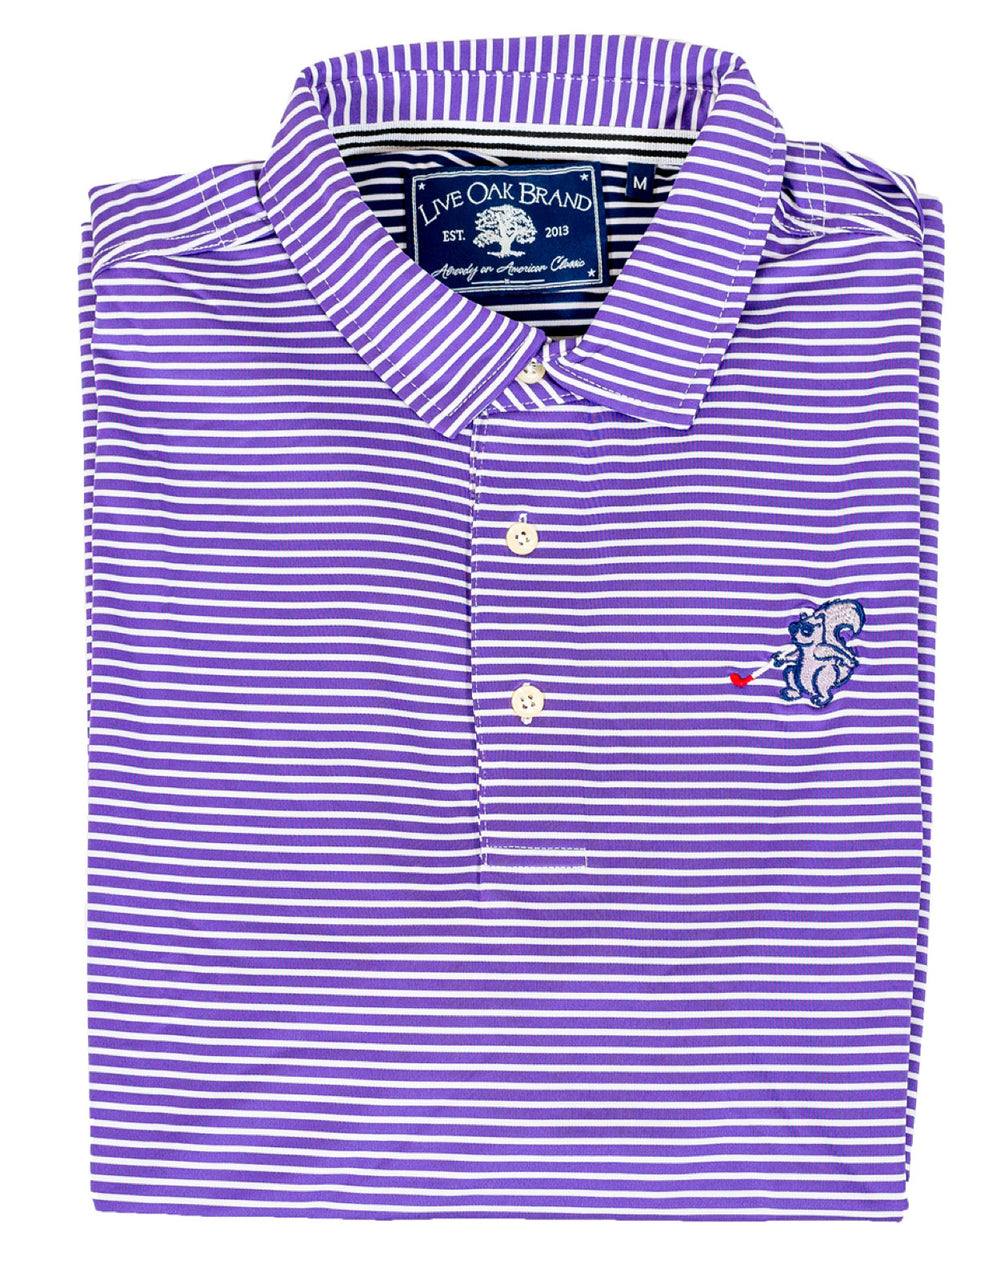 BLIND SQUIRREL STRIPED PERFORMANCE POLO, PURPLE